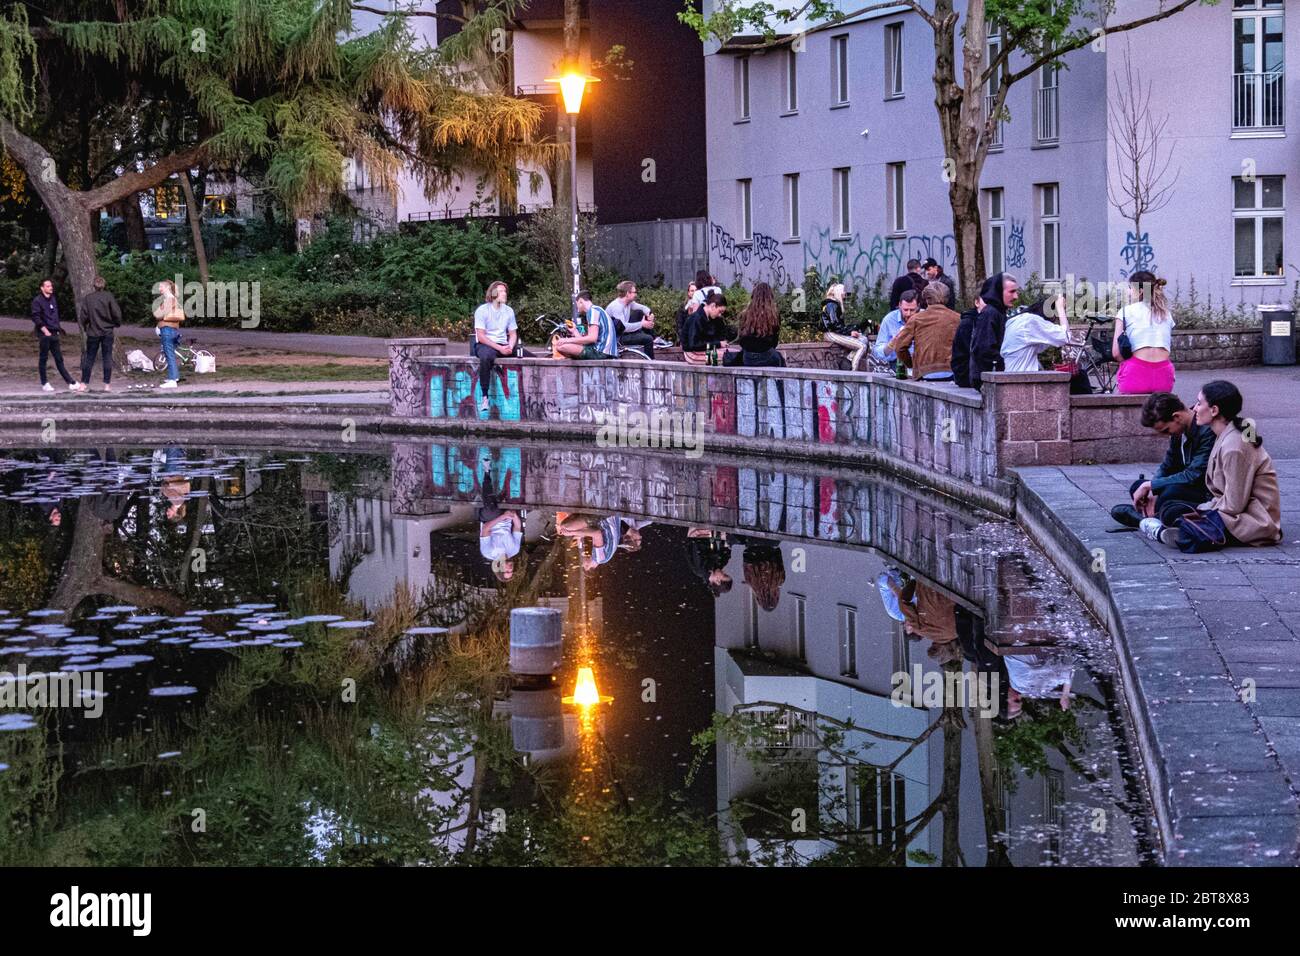 People sitting next to pond in Weinberspark in Mitte, Berlin during the Corona pandemic Stock Photo